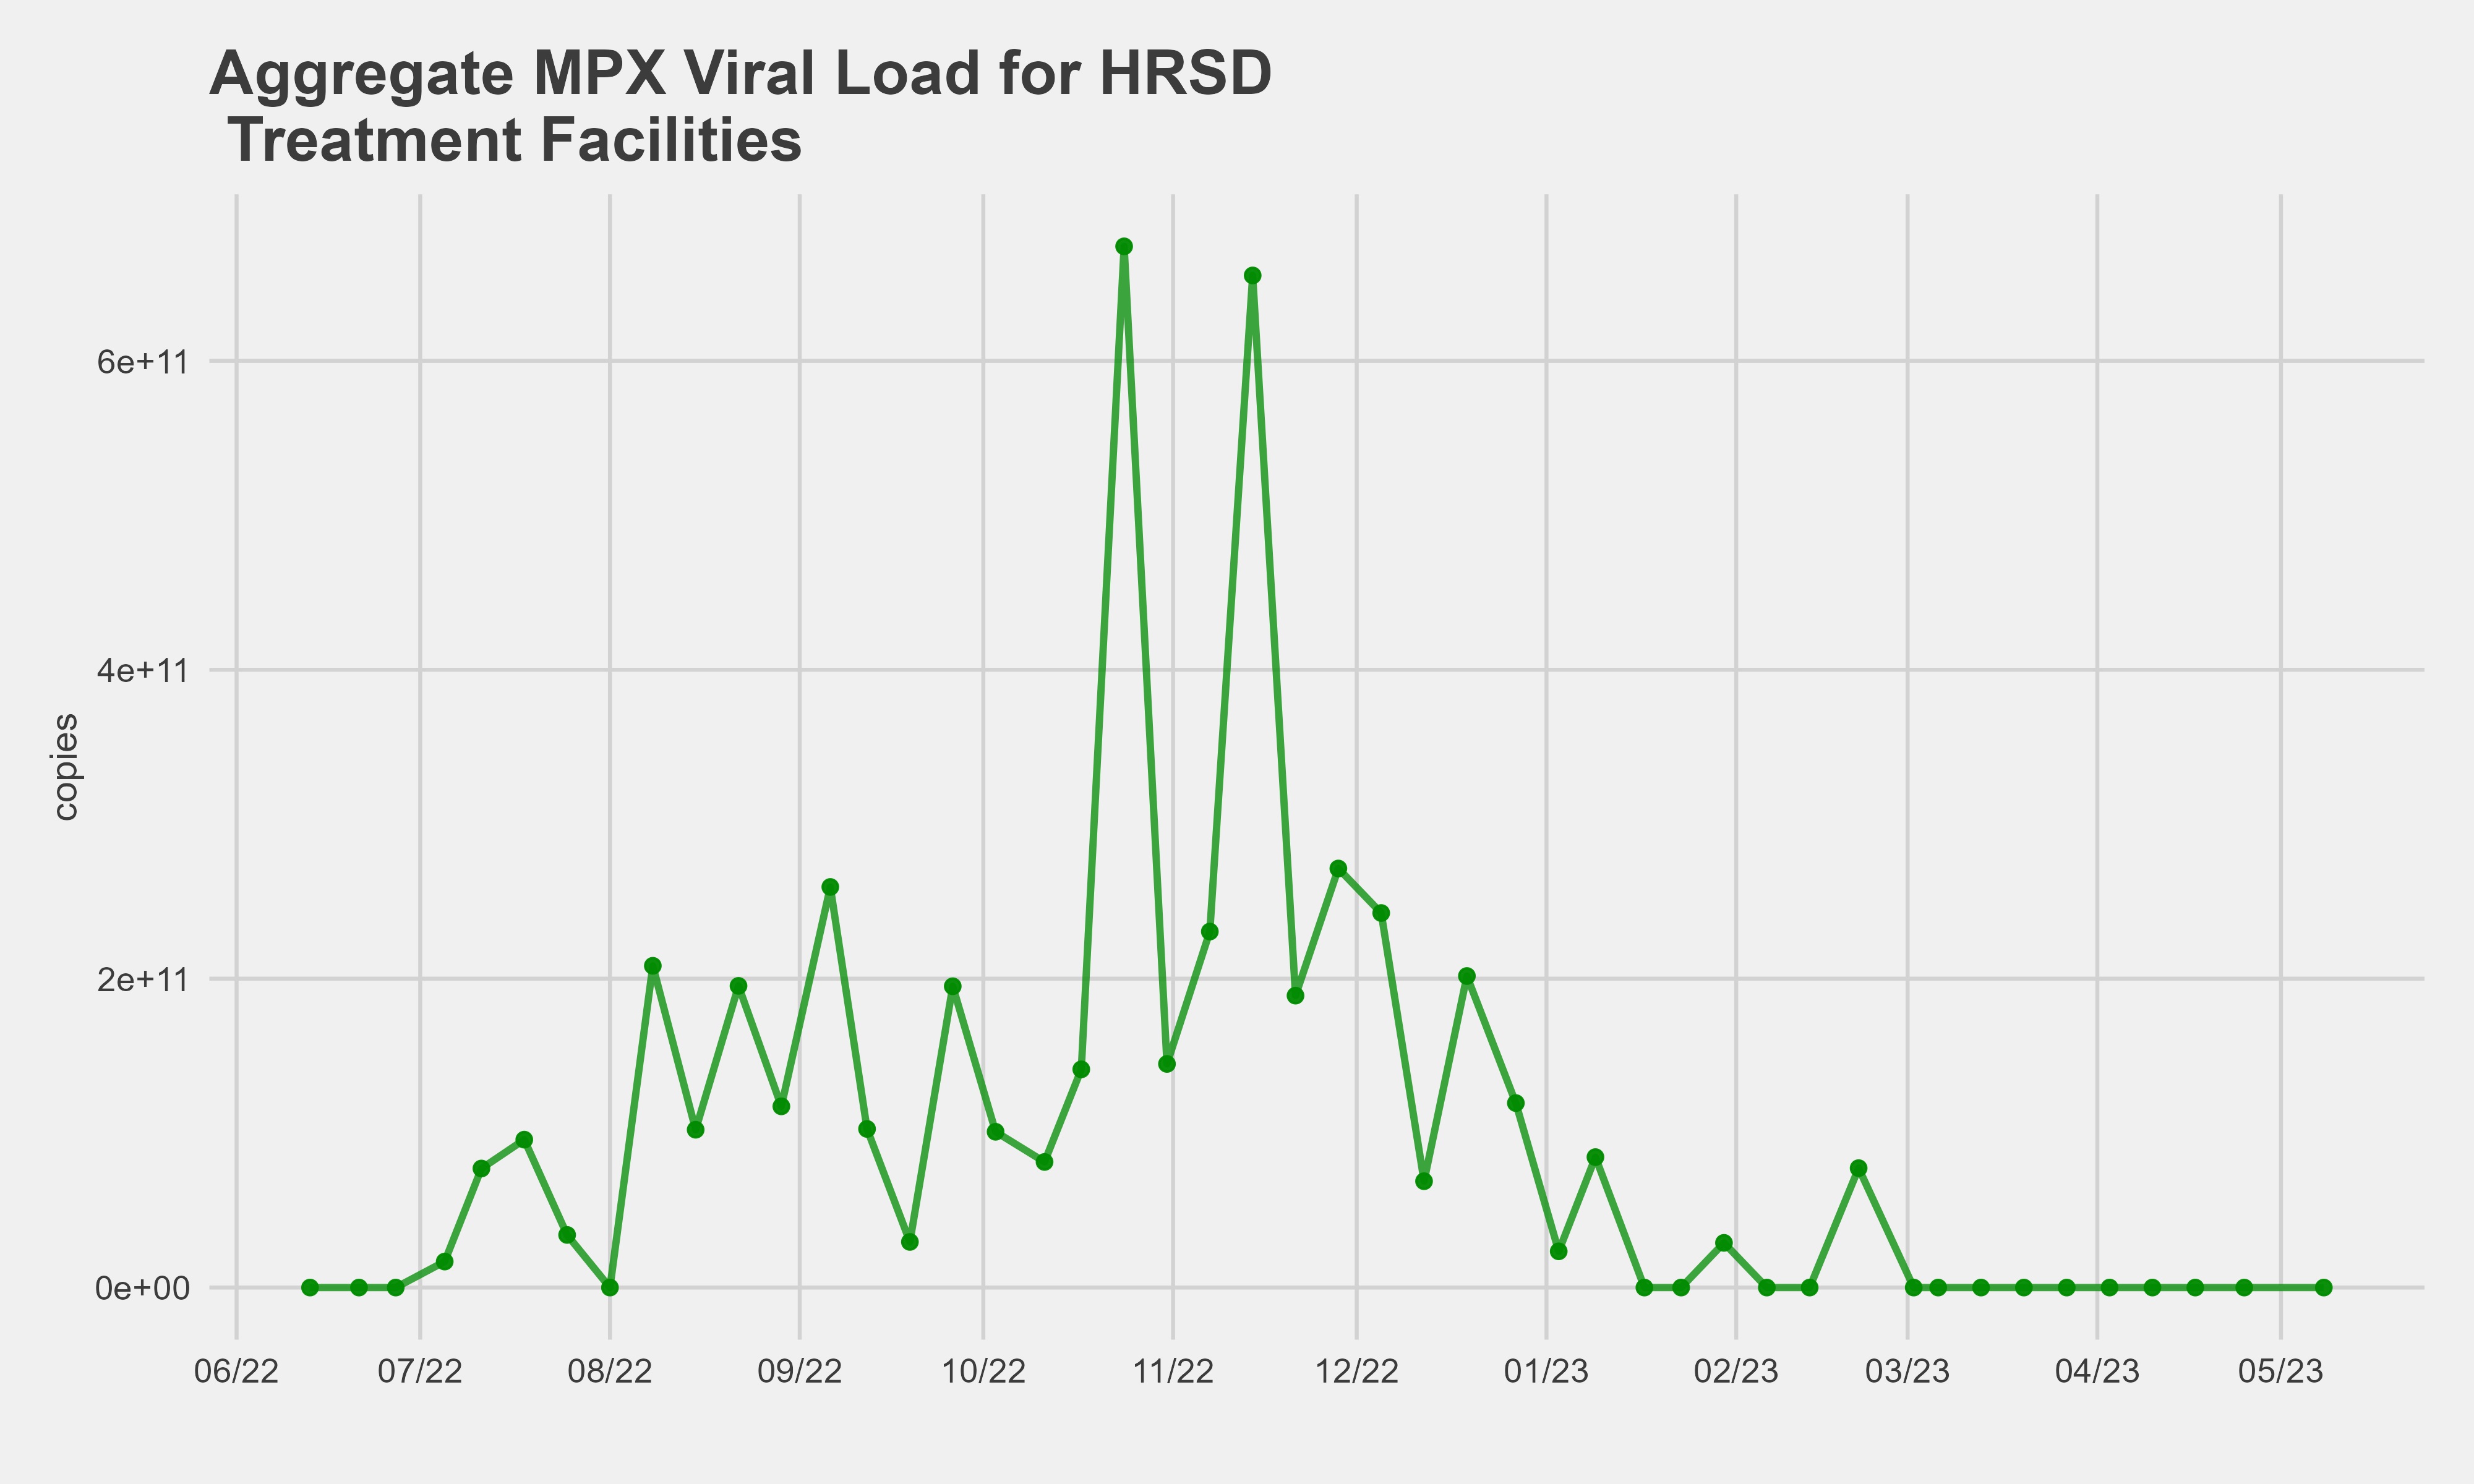 Daily New Clinical Cases and Viral Load in HRSD Treatment Facilities